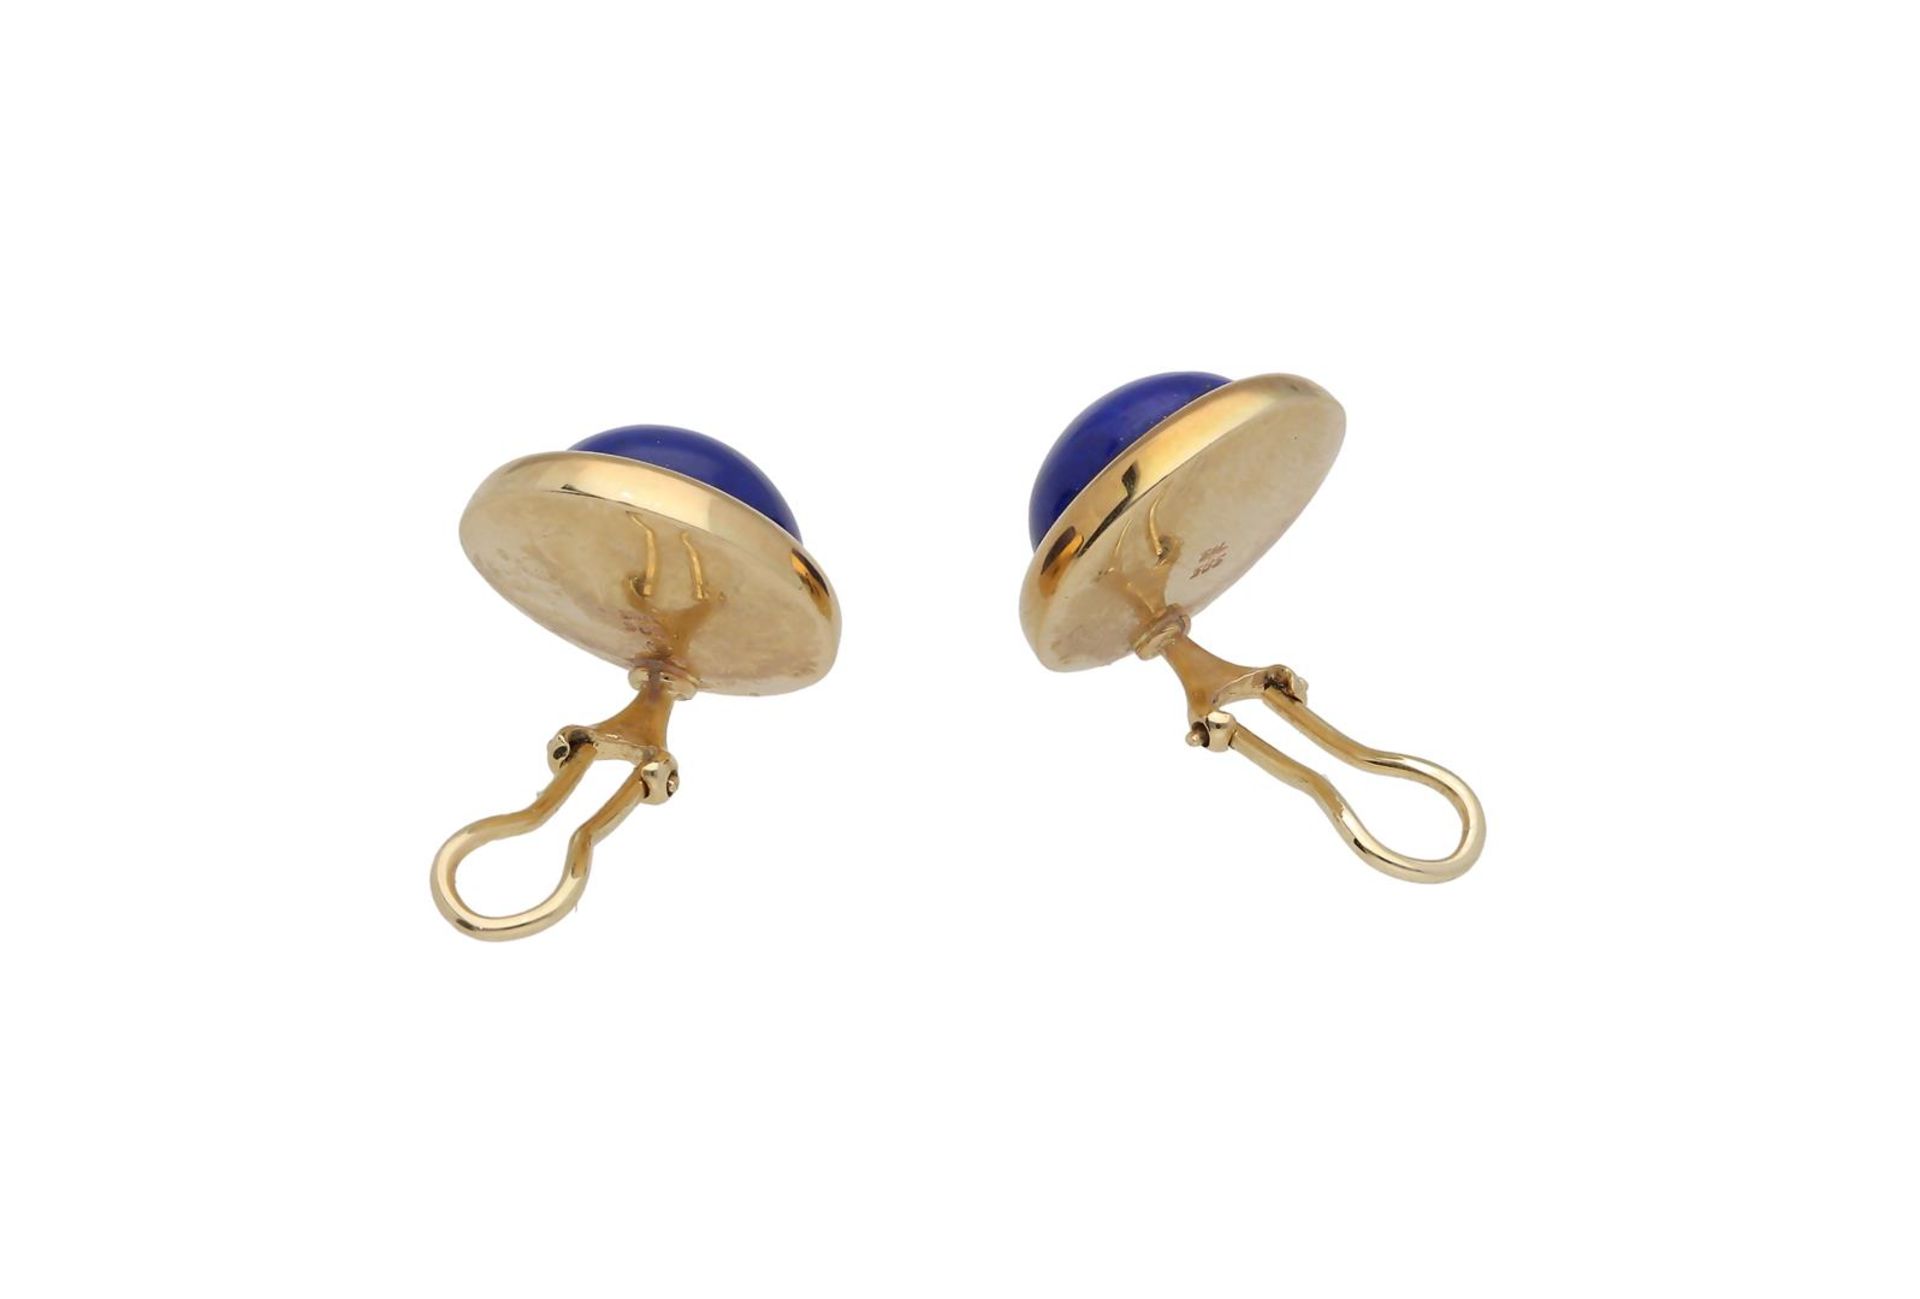 A pair of 14-kt. gold earclips, set with lapis lazuli cabochons.
D: 1.7 cm. Total weight:  7.1 g. - Bild 3 aus 3